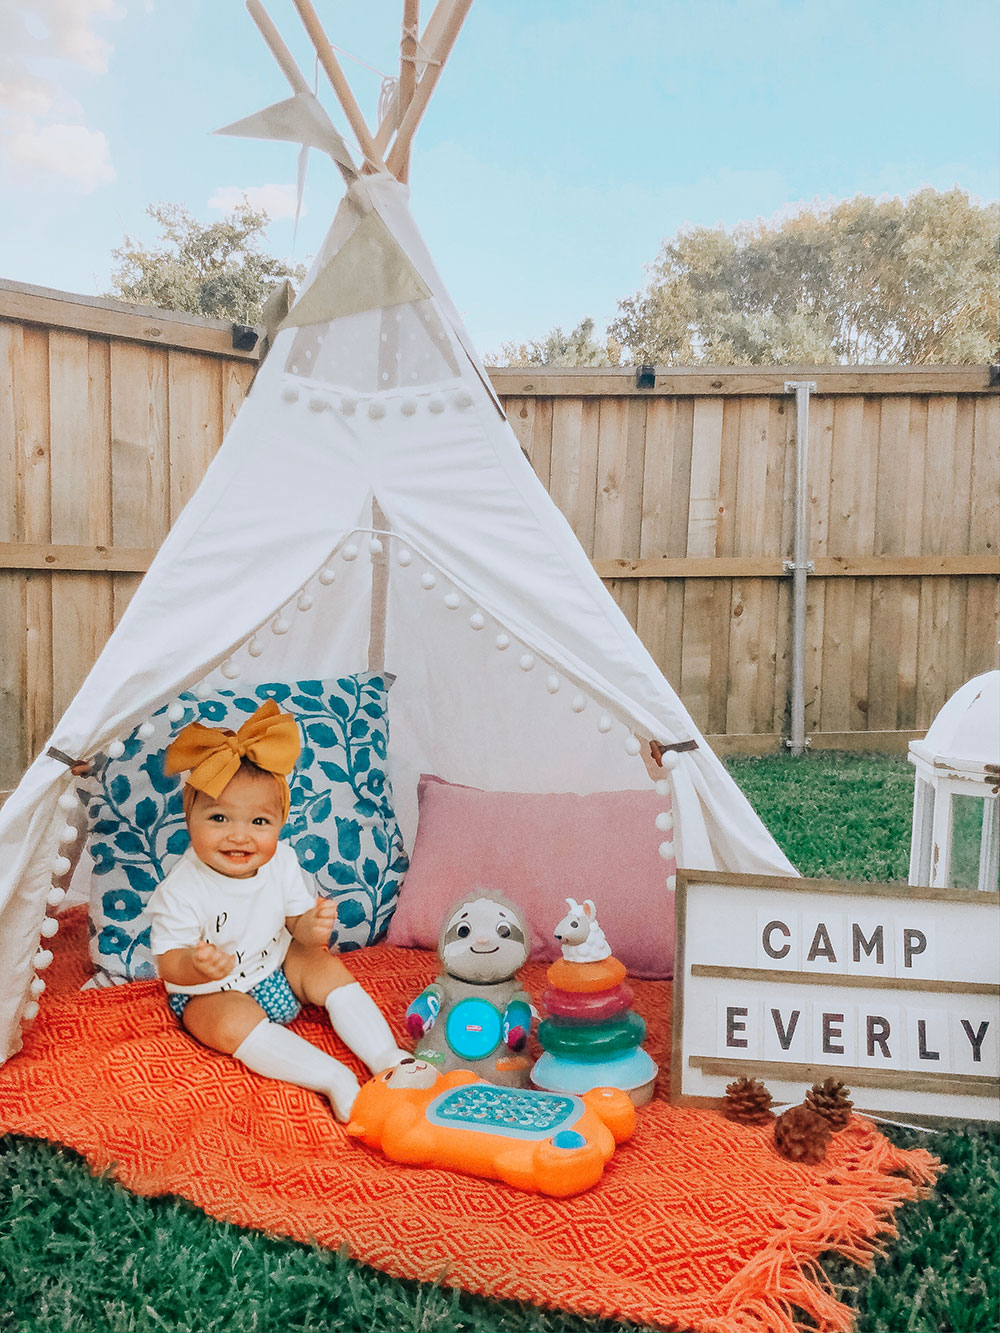 outdoor activity ideas for kids - backyard camping in a tent